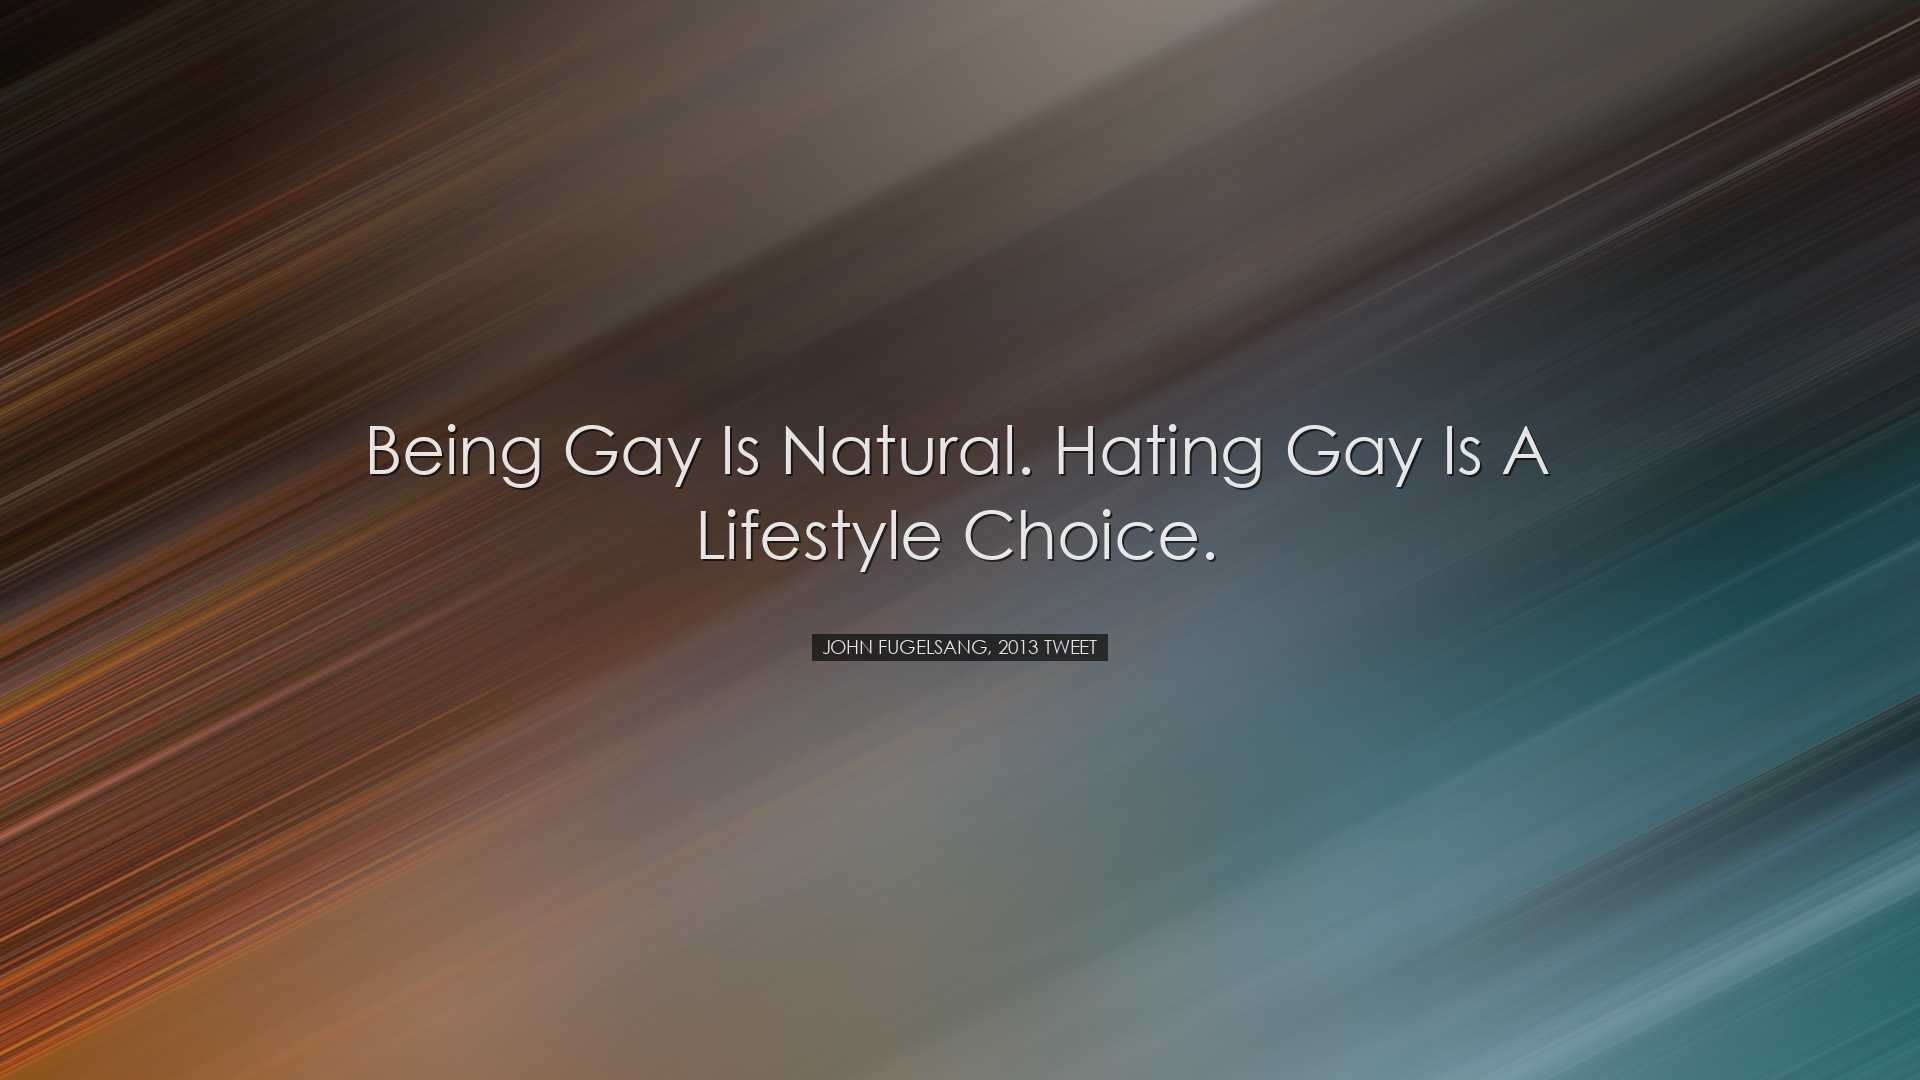 Being gay is natural. Hating gay is a lifestyle choice. - John Fug